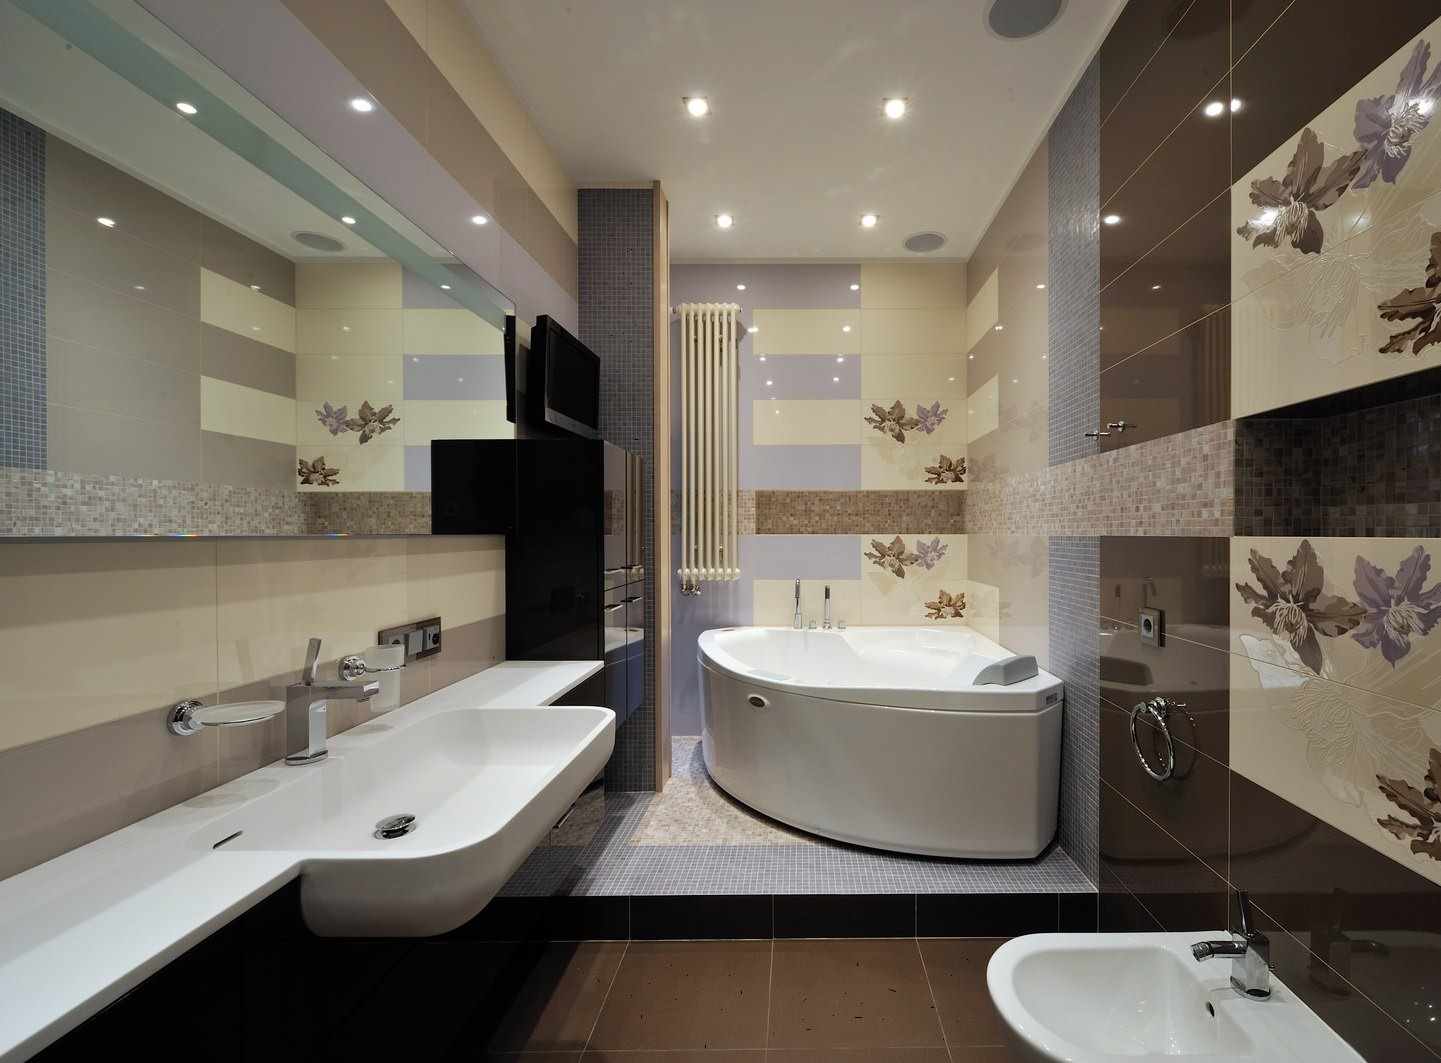 variant of the unusual interior of the bathroom with a corner bath